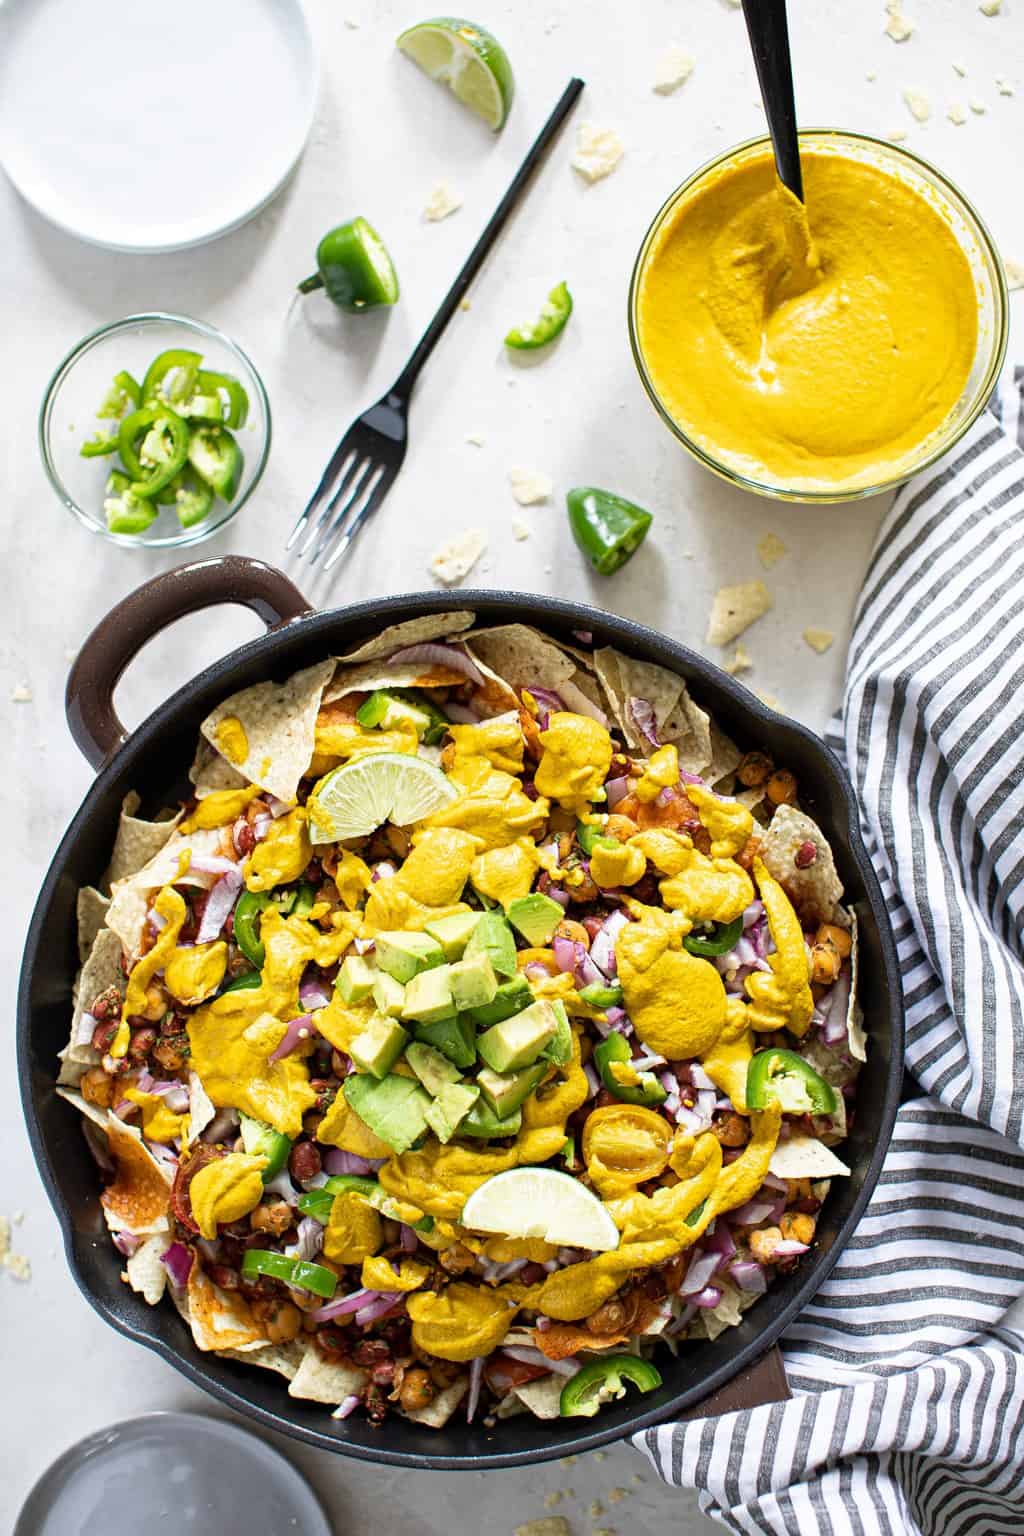 Loaded Vegan Queso Skillet Nachos with chickpeas, red kidney beans and cashew-based queso